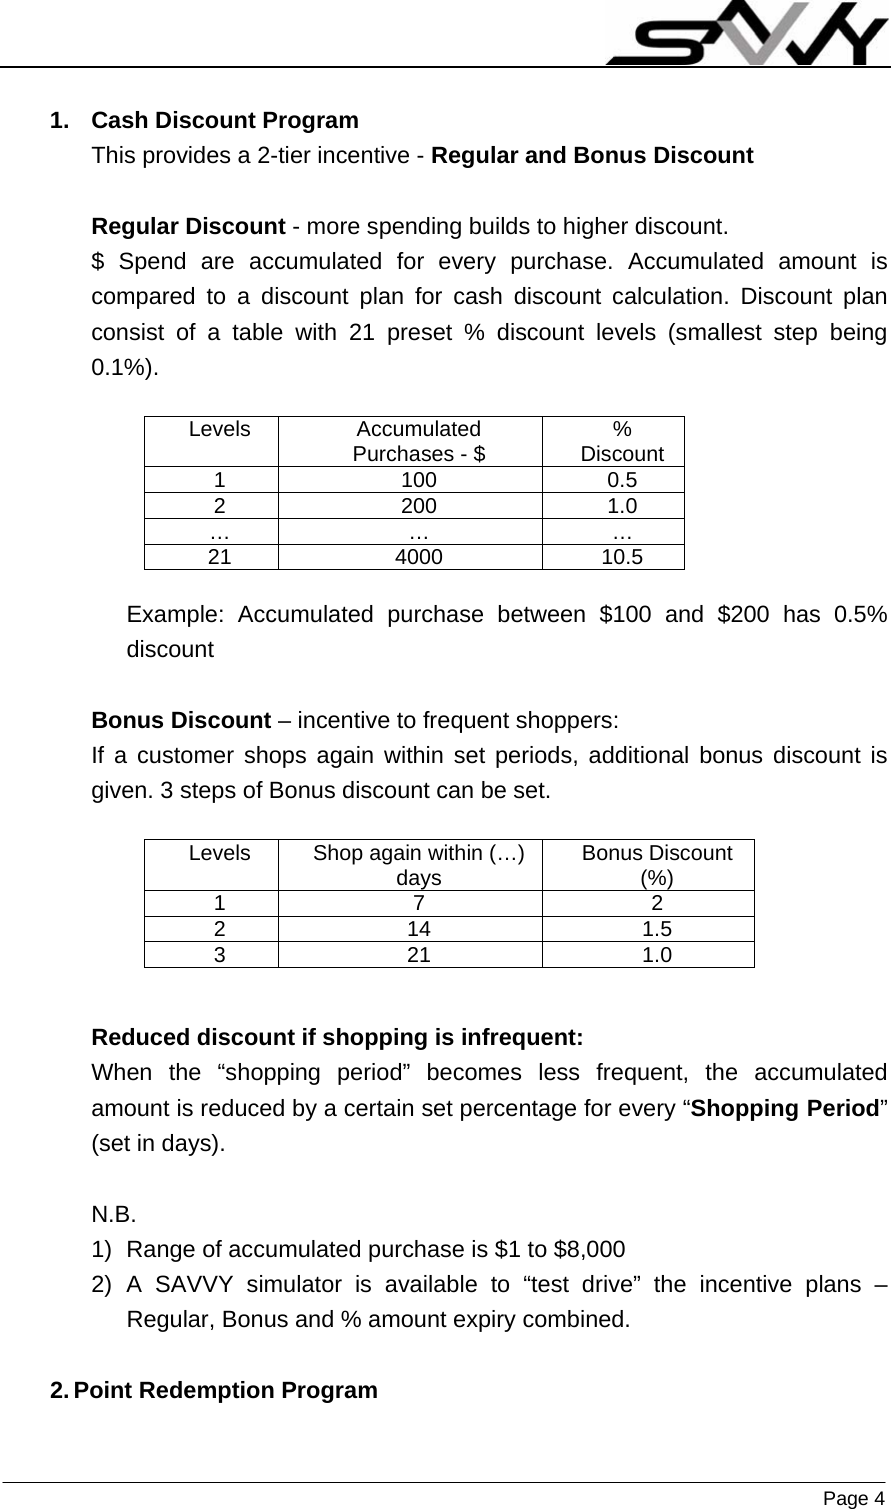                    Page 4   1. Cash Discount Program This provides a 2-tier incentive - Regular and Bonus Discount  Regular Discount - more spending builds to higher discount. $ Spend are accumulated for every purchase. Accumulated amount is compared to a discount plan for cash discount calculation. Discount plan consist of a table with 21 preset % discount levels (smallest step being 0.1%).       Example: Accumulated purchase between $100 and $200 has 0.5% discount  Bonus Discount – incentive to frequent shoppers: If a customer shops again within set periods, additional bonus discount is given. 3 steps of Bonus discount can be set.       Reduced discount if shopping is infrequent: When the “shopping period” becomes less frequent, the accumulated amount is reduced by a certain set percentage for every “Shopping Period” (set in days).  N.B. 1)  Range of accumulated purchase is $1 to $8,000 2) A SAVVY simulator is available to “test drive” the incentive plans – Regular, Bonus and % amount expiry combined.  2. Point Redemption Program Levels Accumulated Purchases - $  % Discount 1 100 0.5 2 200 1.0 … …  … 21 4000 10.5 Levels  Shop again within (…) days  Bonus Discount (%) 1 7  2 2 14  1.5 3 21  1.0 